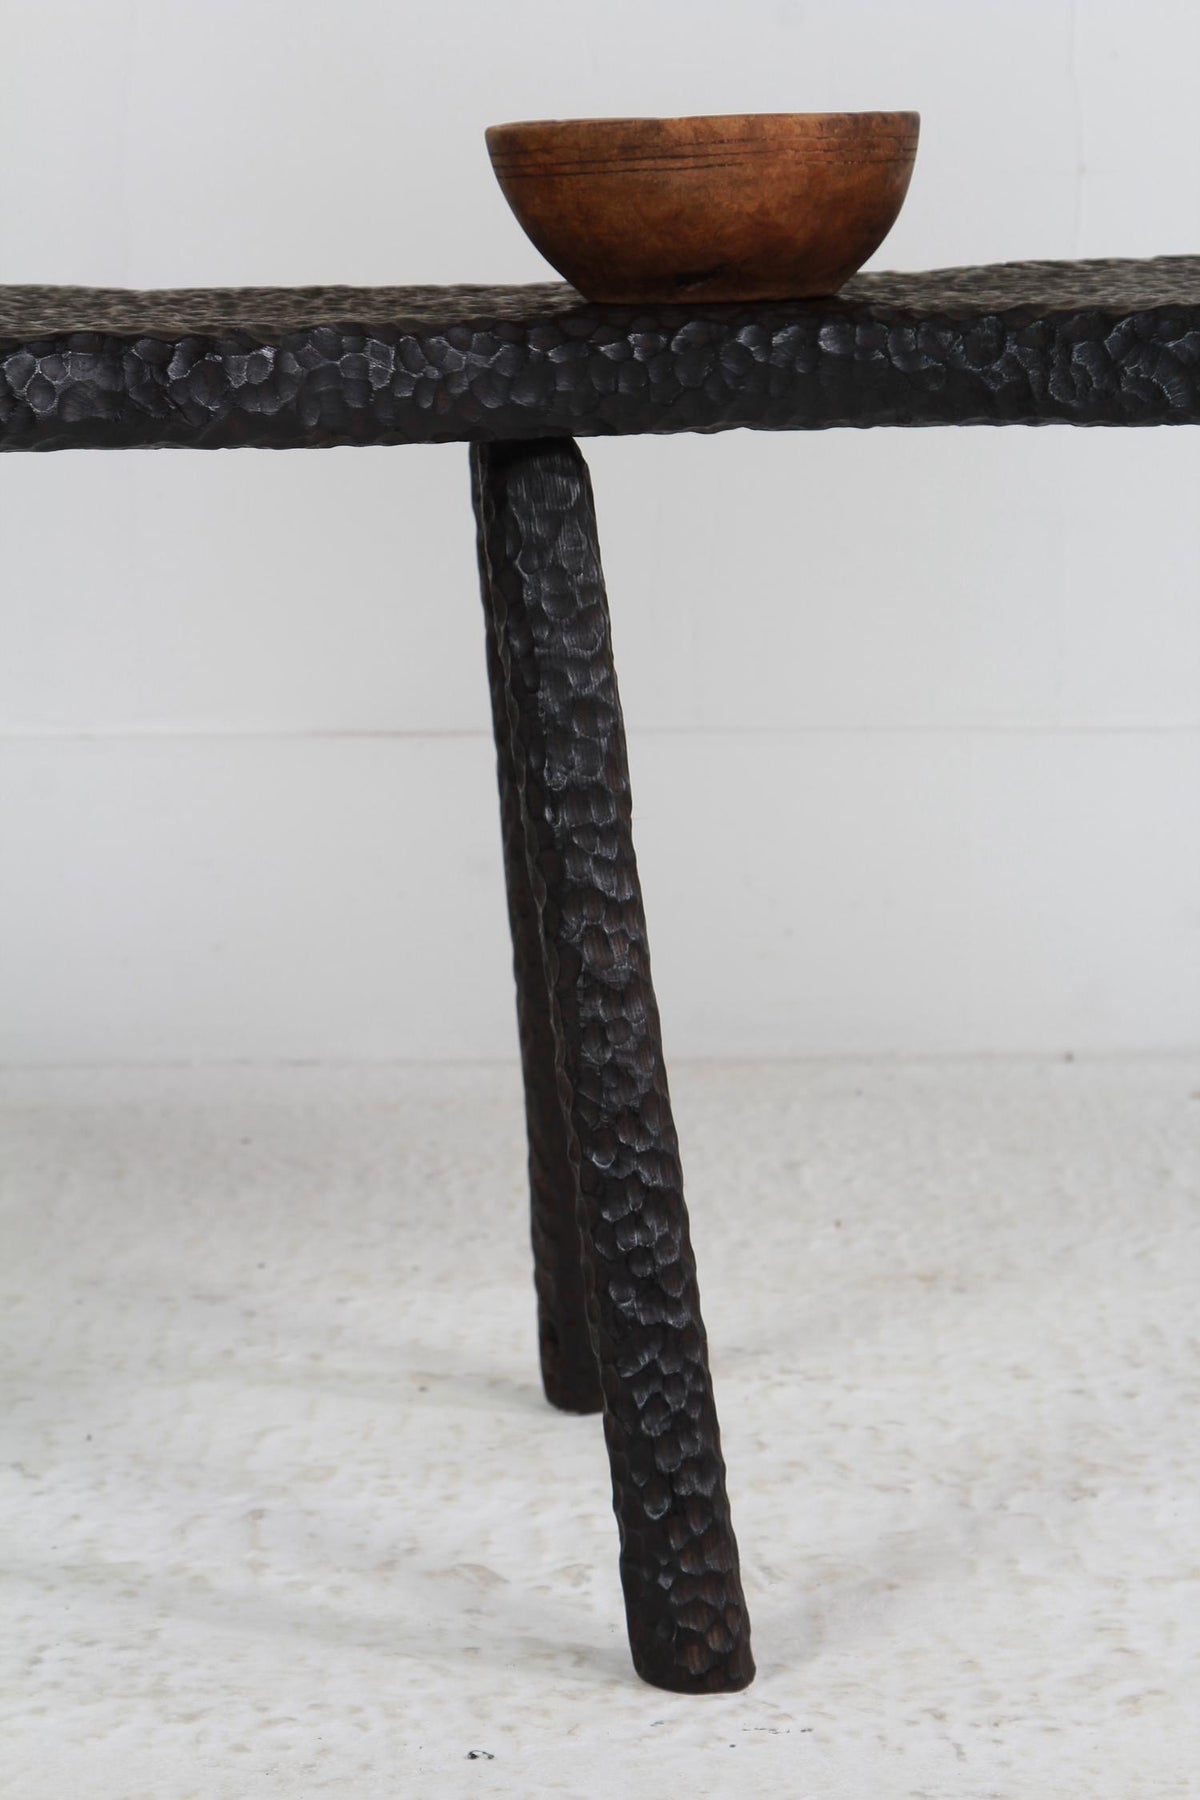 Mature Oak Textured  & Shapely Oriental Inspired  Decorated Burnt wood  Coffee Table/Bench.Please Enquire